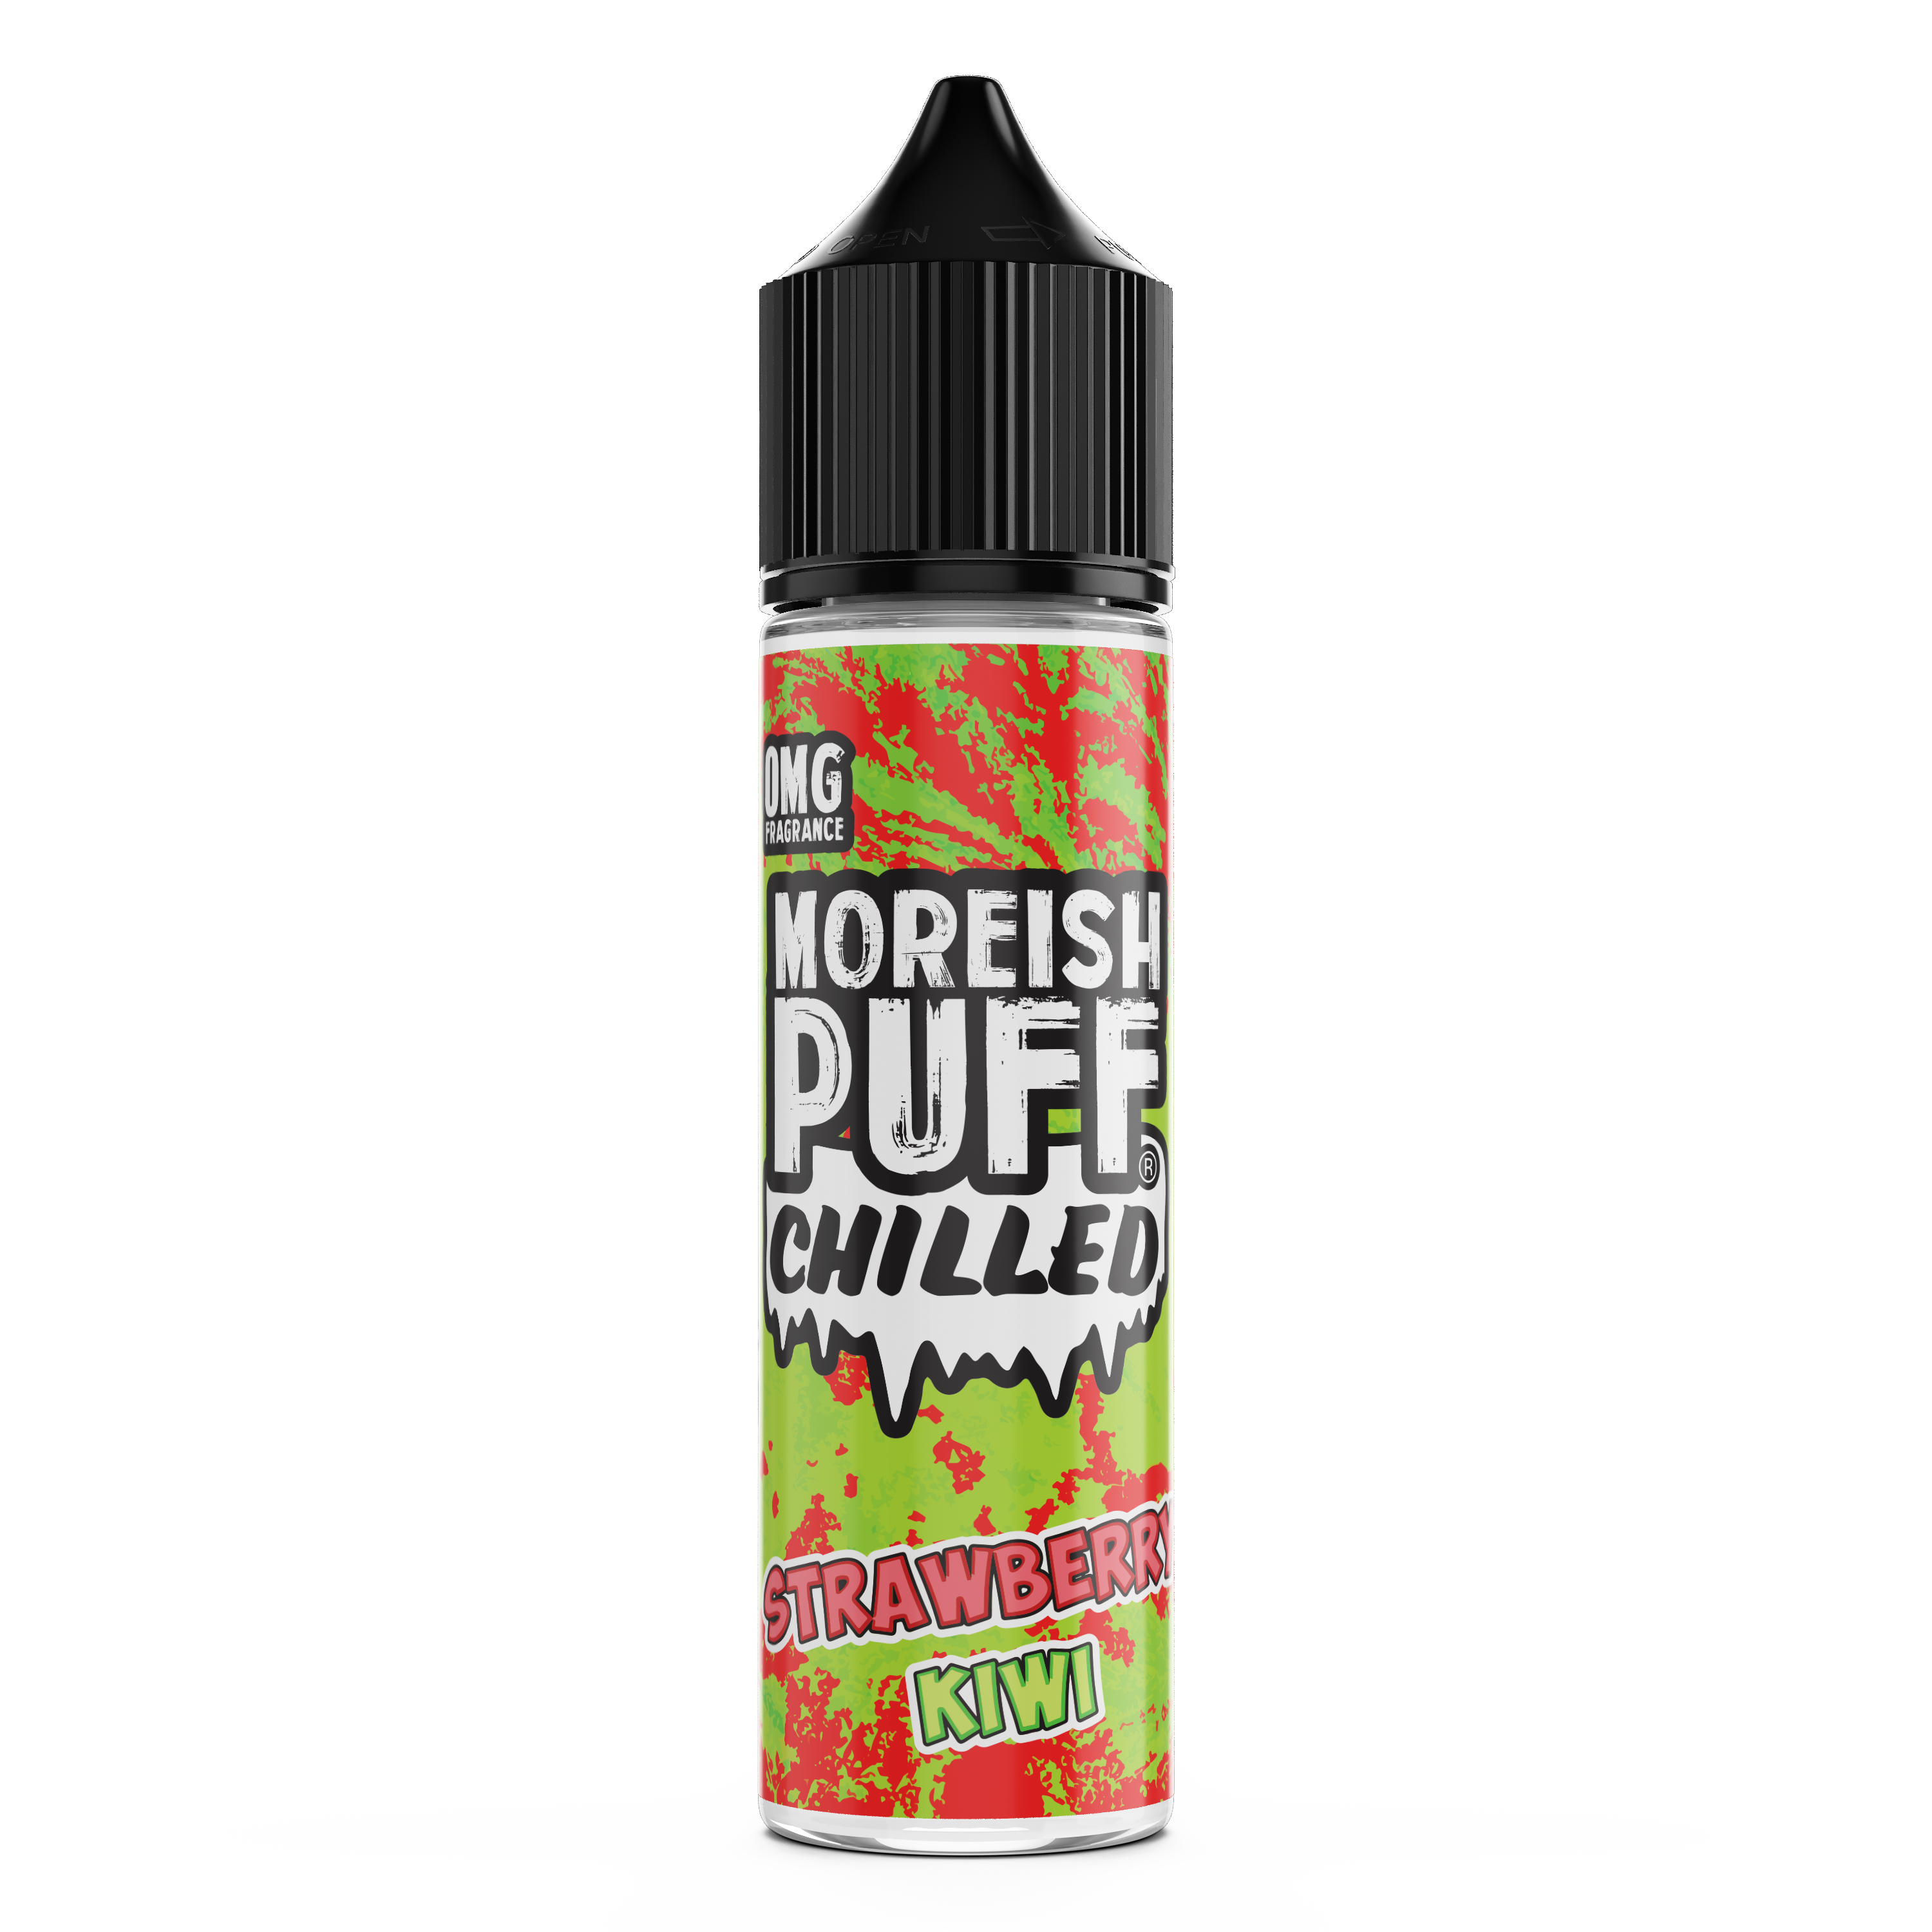 Strawberry and Kiwi Chilled E-liquid by Moreish Puff 50ml Shortfill